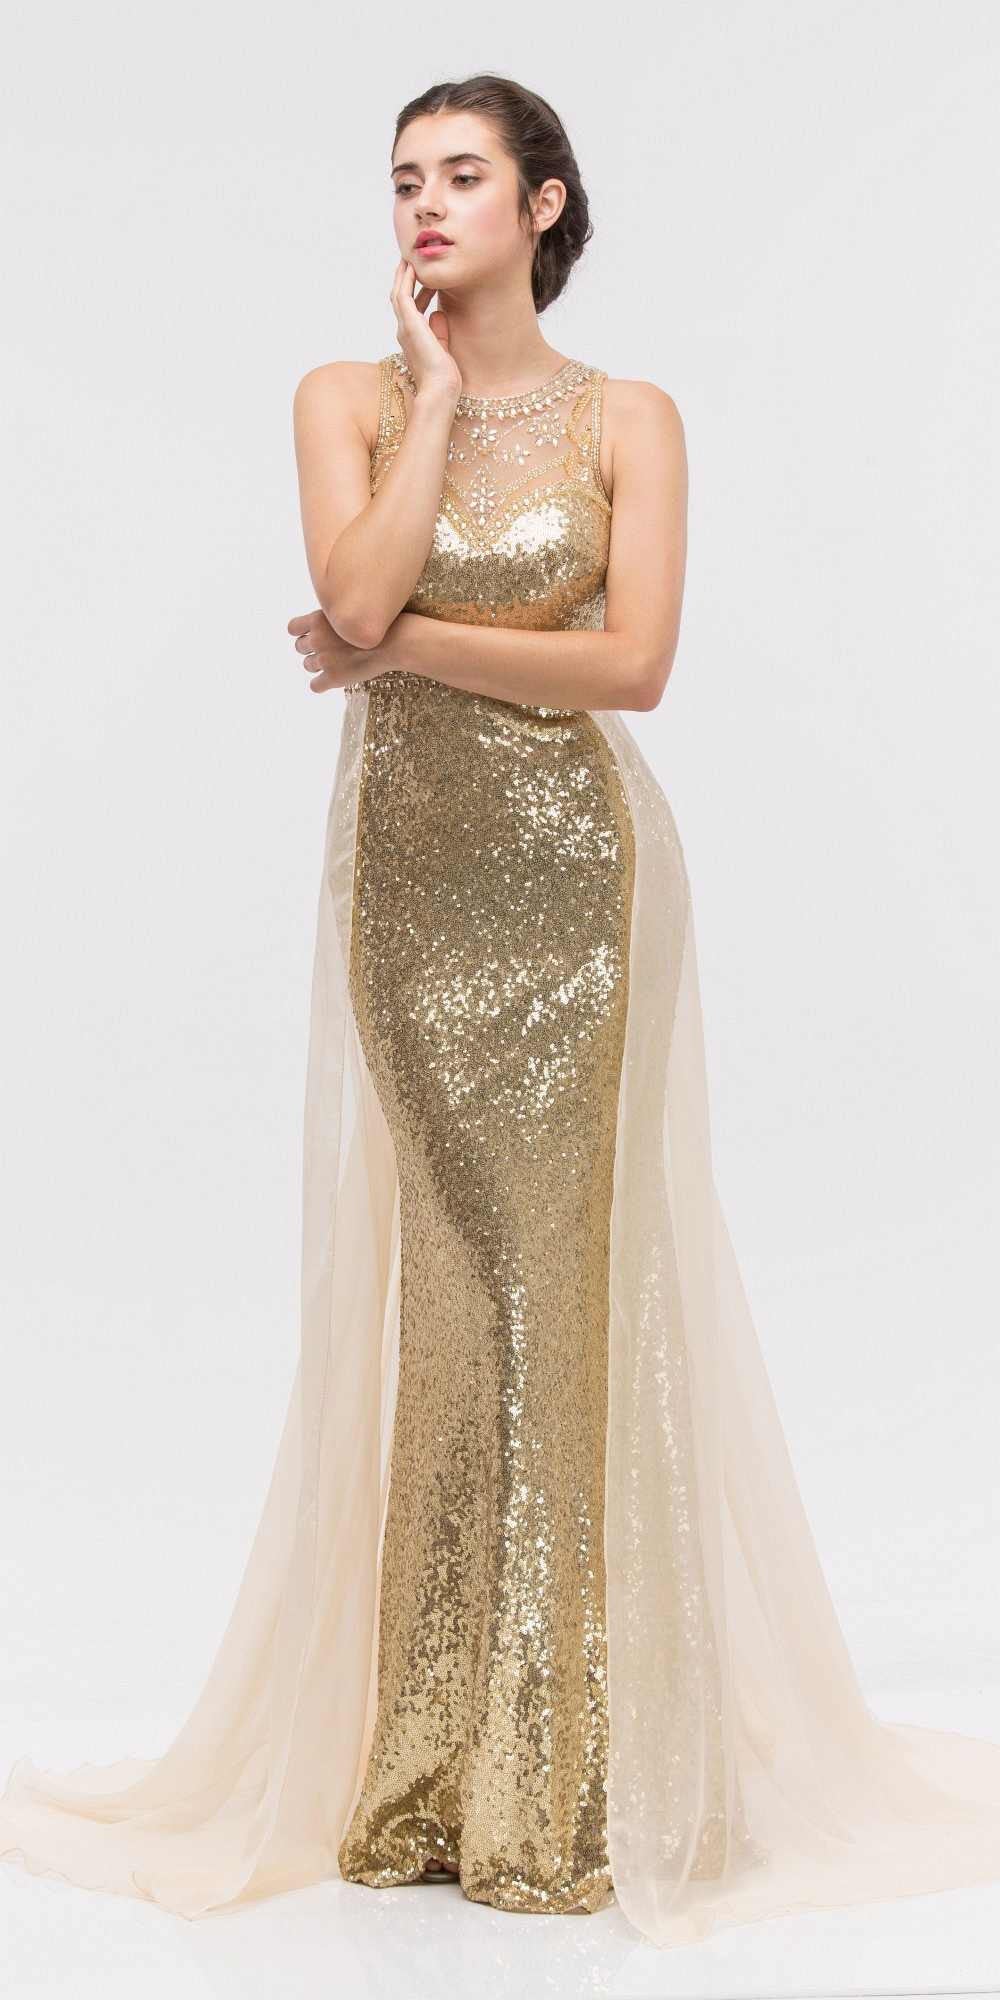 Eureka Fashion 3335 Illusion Sequins Prom Gown Sleeveless with Sheer Train Gold